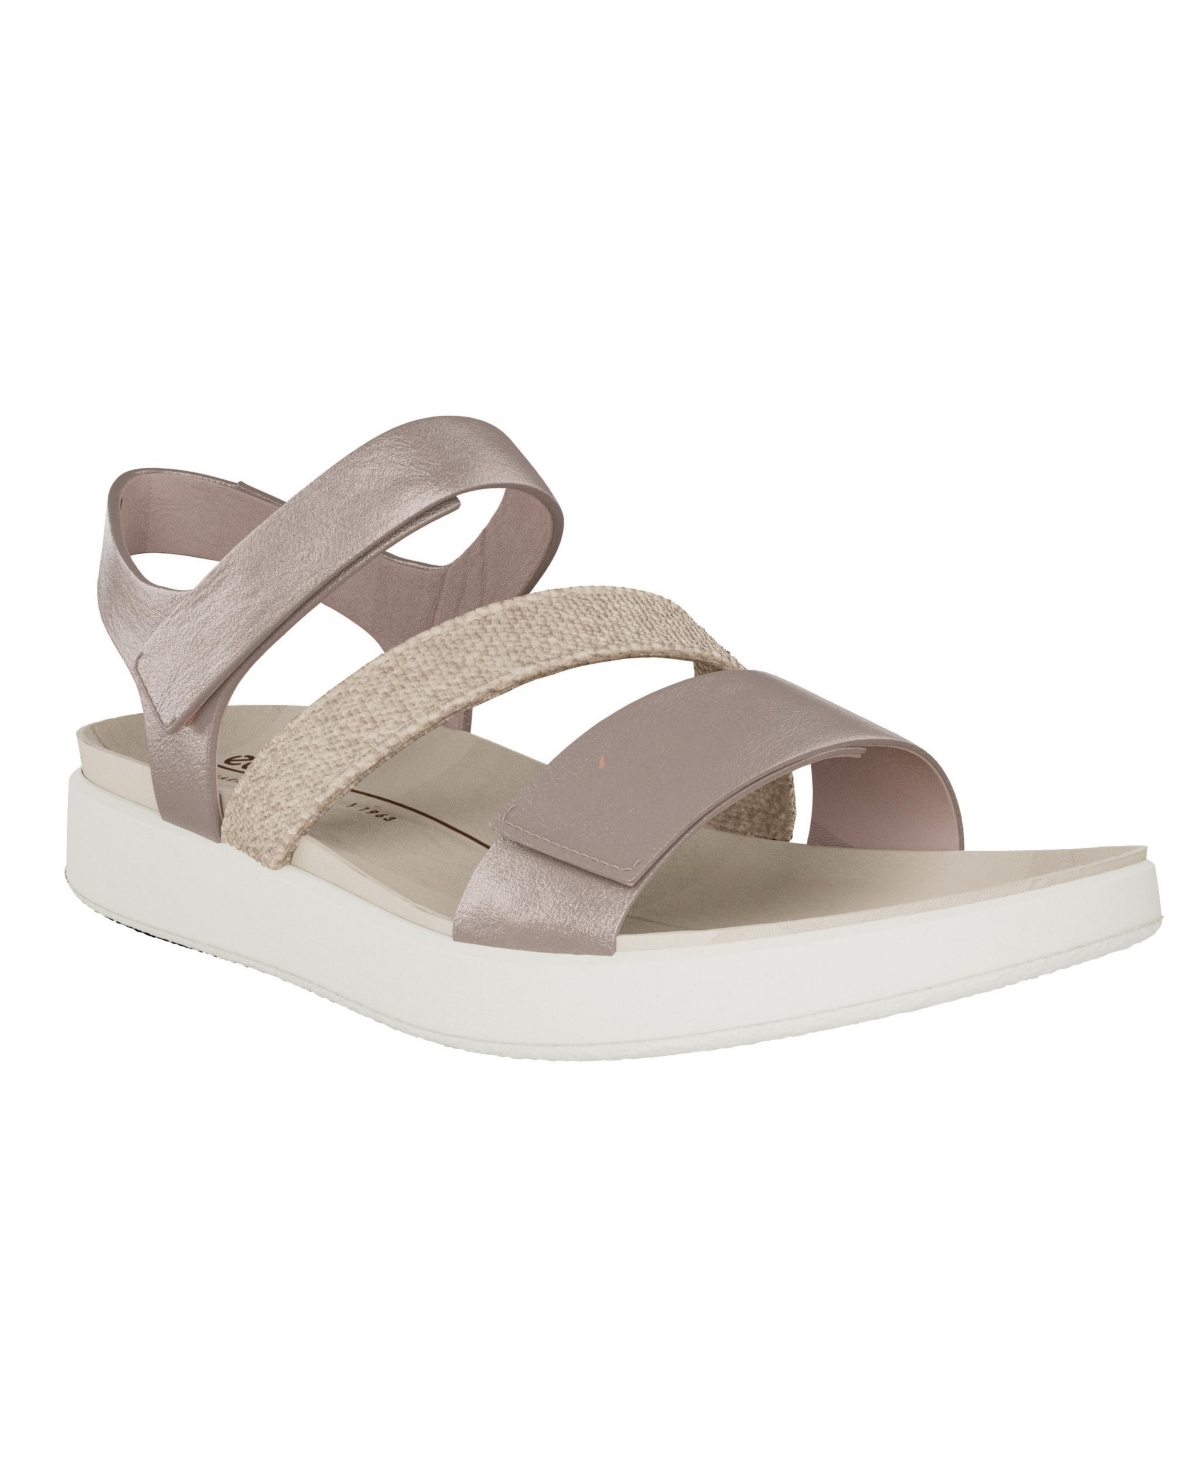 UPC 194891090780 product image for Ecco Women's Flowt 2 Band Sandals Women's Shoes | upcitemdb.com